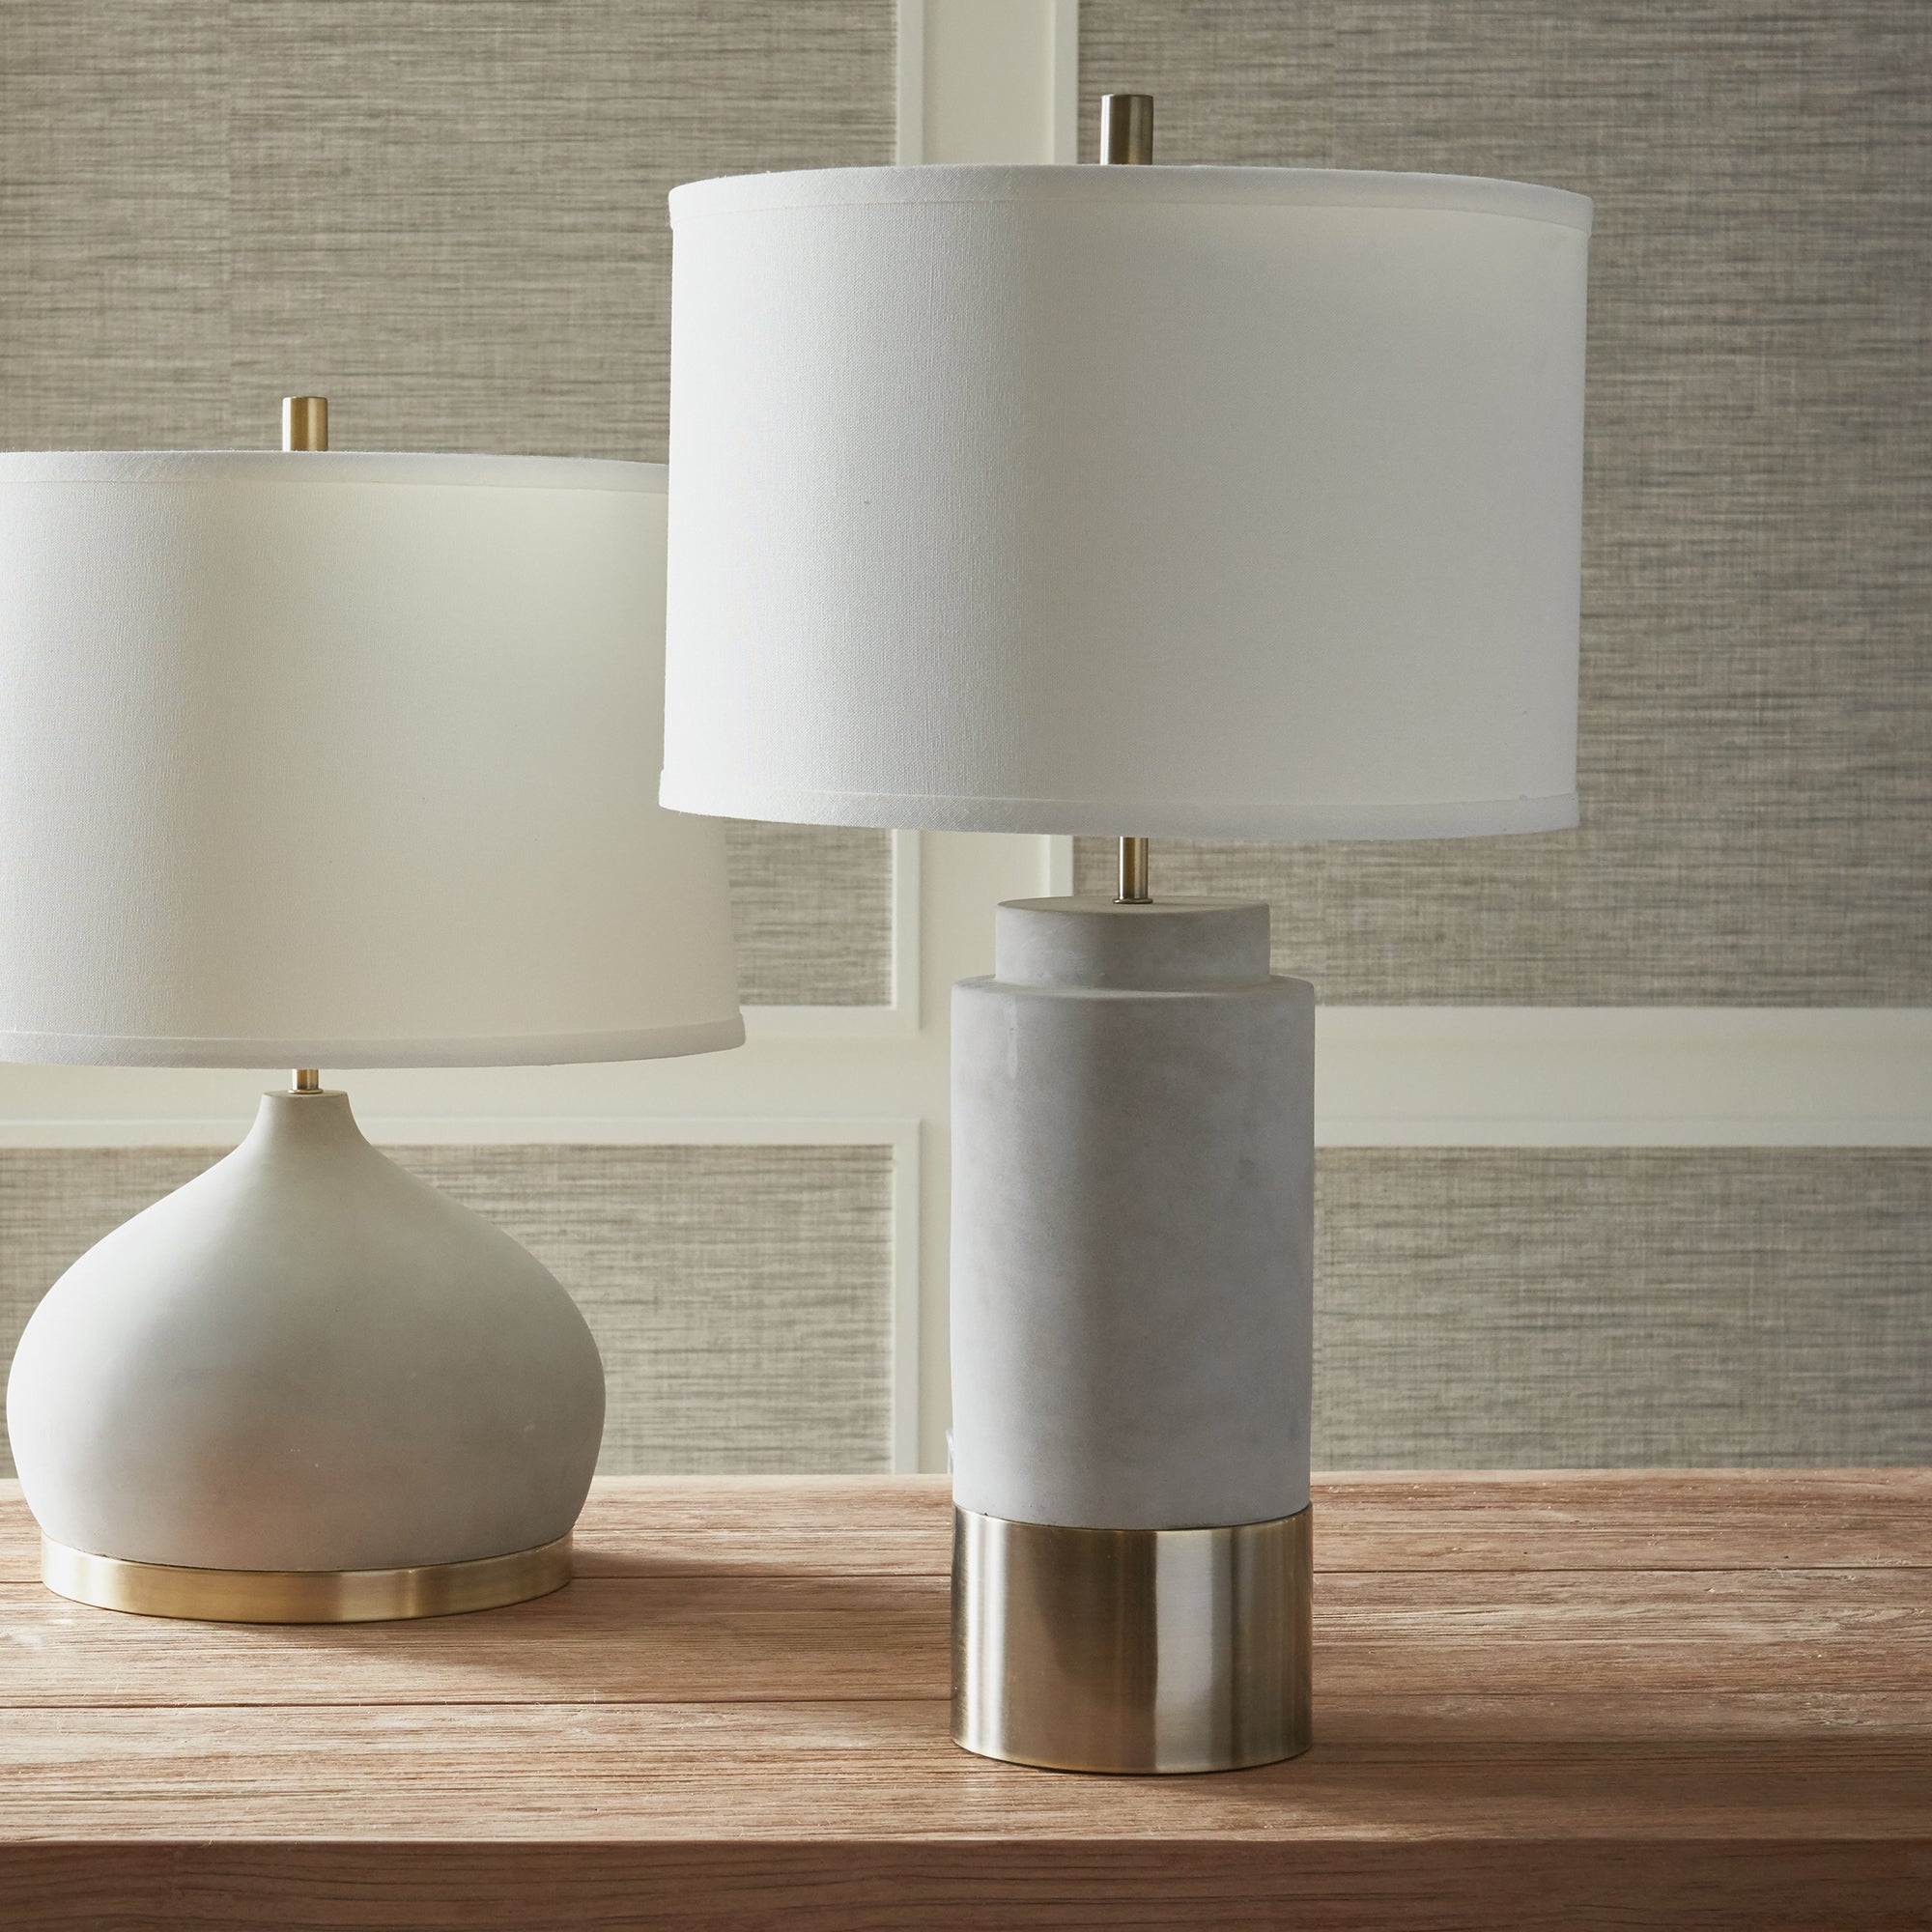 An unexpected mix of cement and brass accents make the Scully Cylinder lamp a stand out piece. The tall, narrow base and tailored shade are well-designed details not to be missed. Amethyst Home provides interior design, new construction, custom furniture, and area rugs in the San Diego metro area.